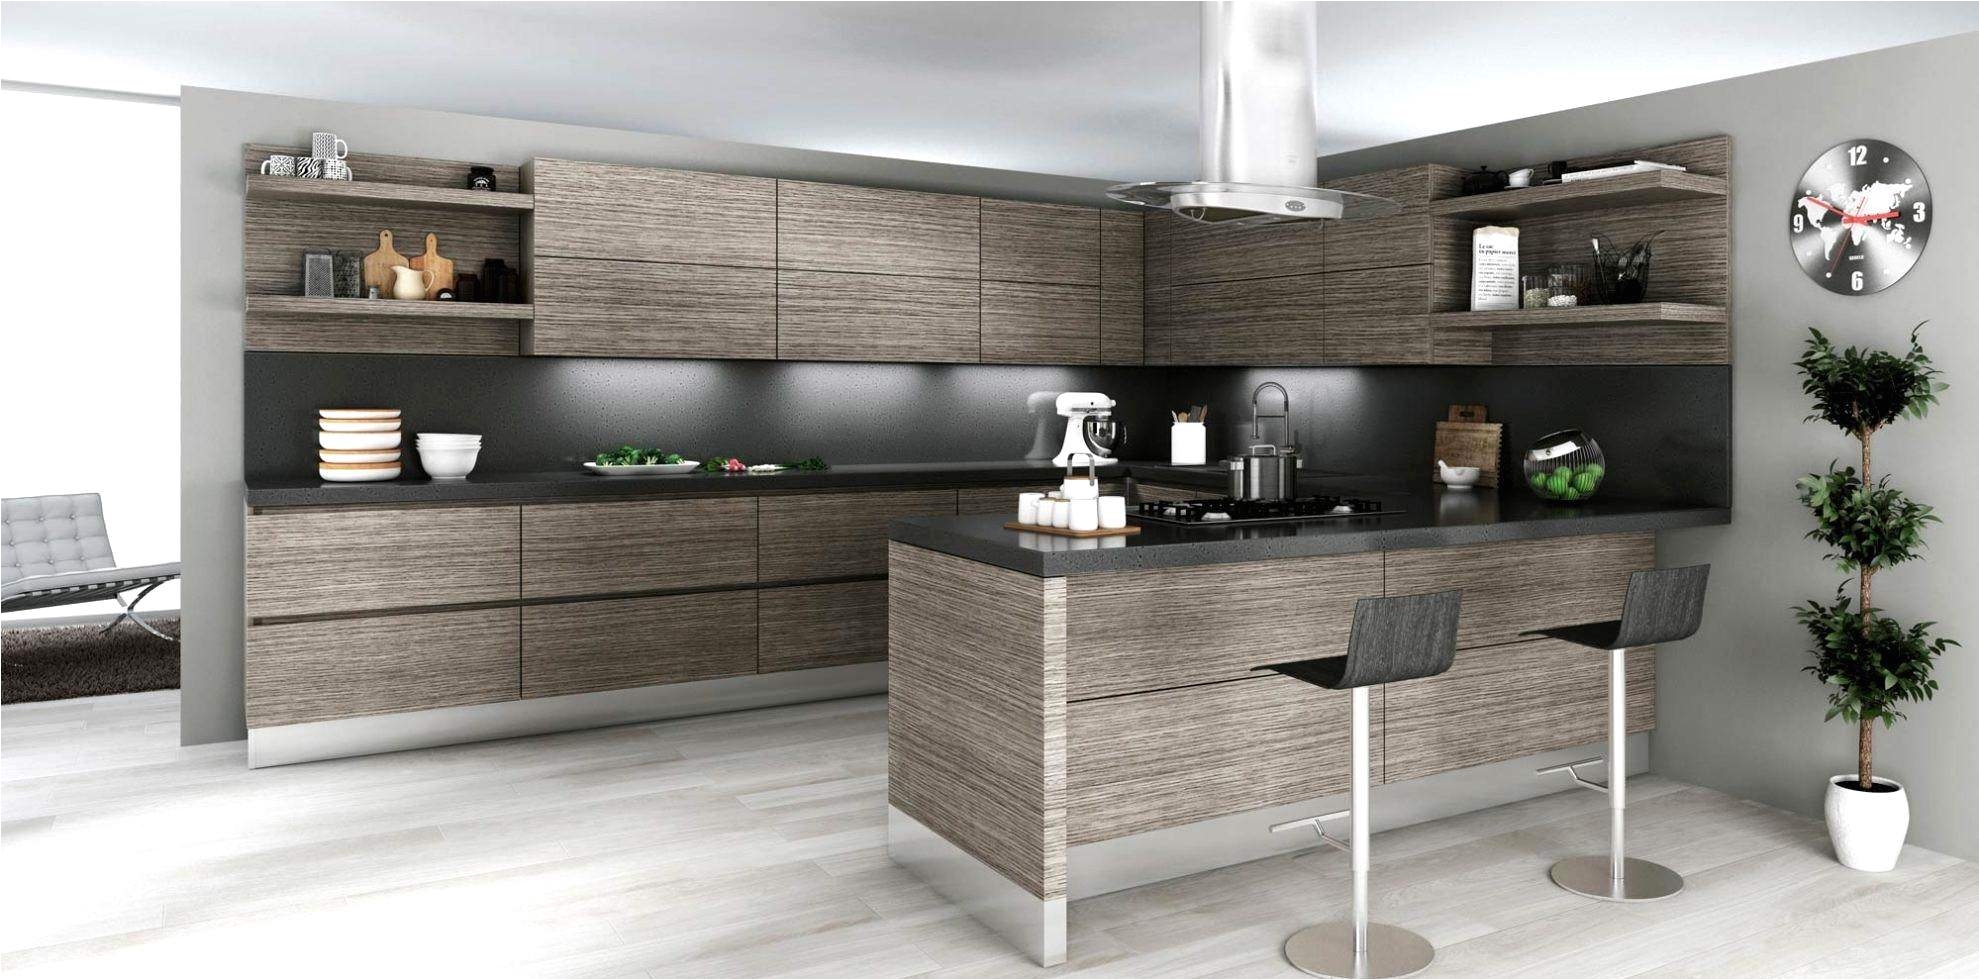 kitchen cabinets lowes ca luxury 12 new thomasville kitchen cabinets dimensions lacedwithluster